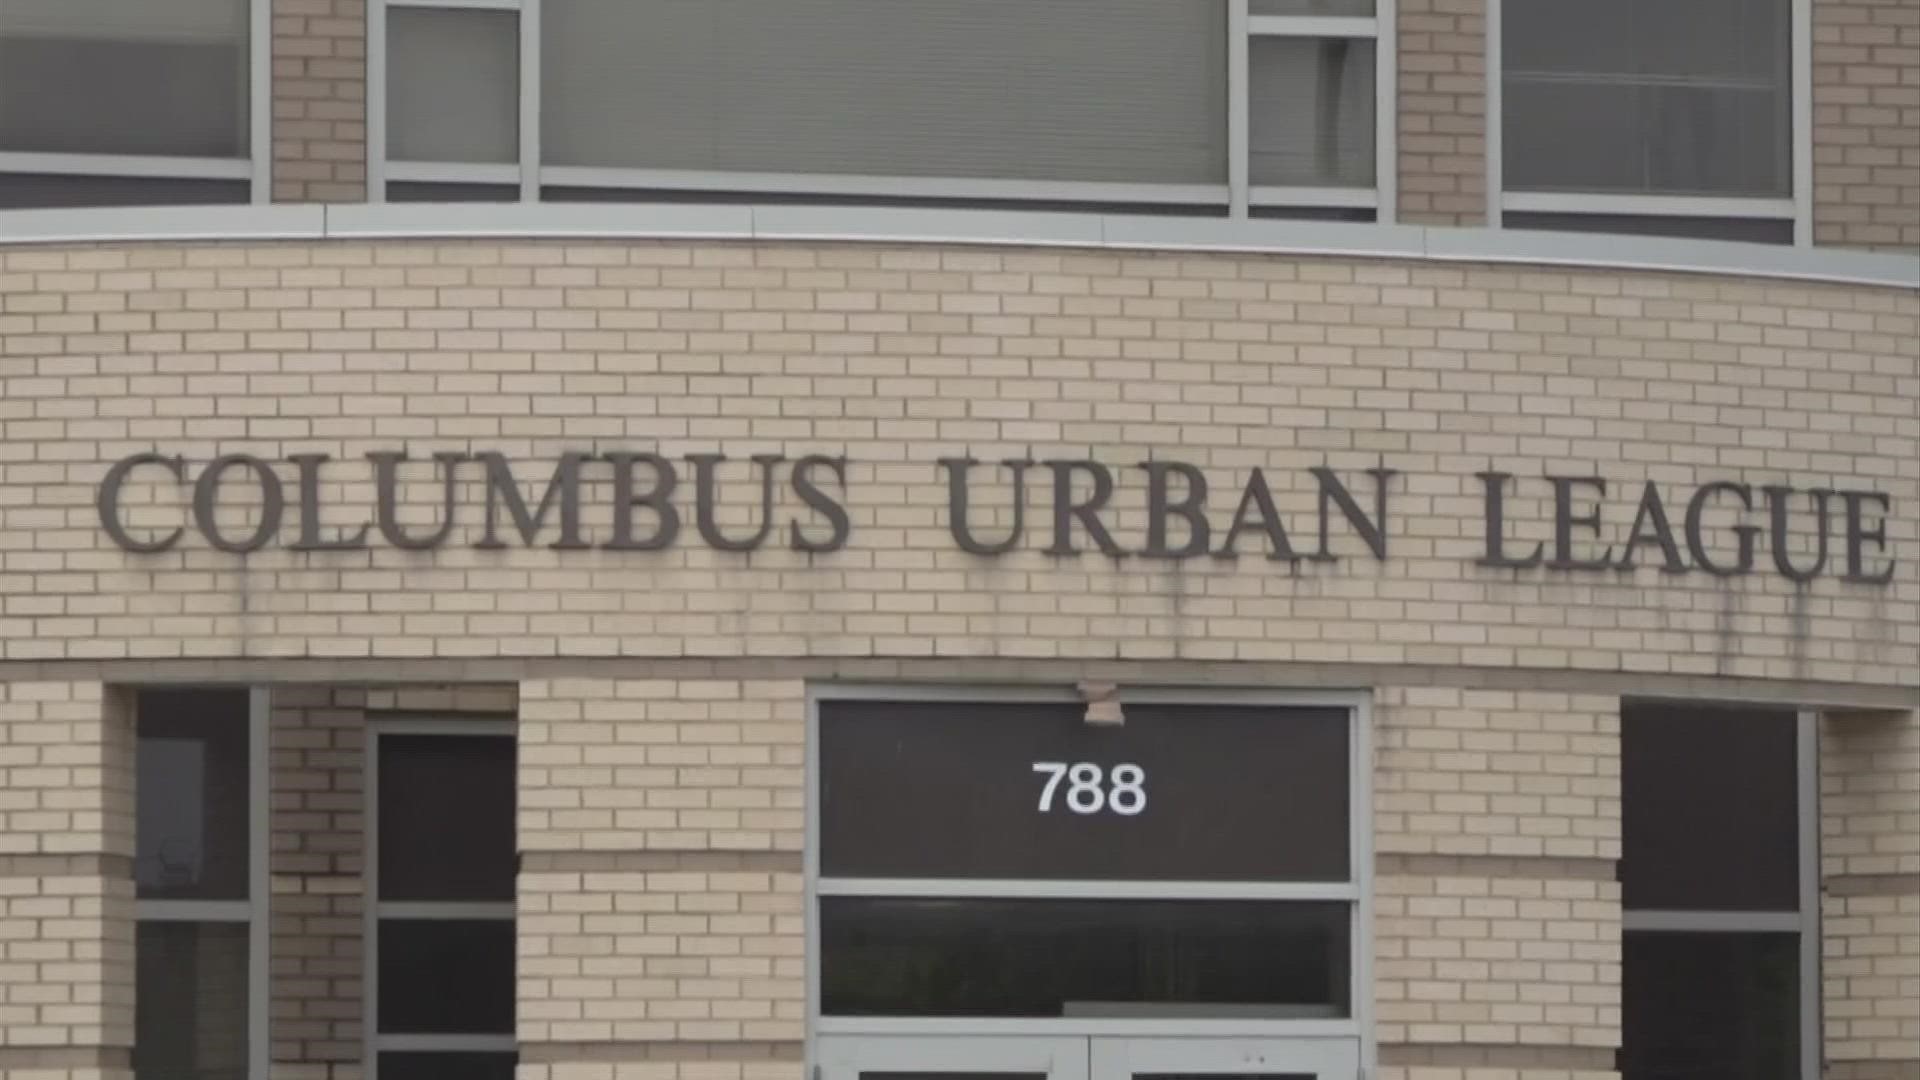 Through a new city-funded program called the “Parent Enrichment Program," the Columbus Urban League is working with the juvenile justice system.